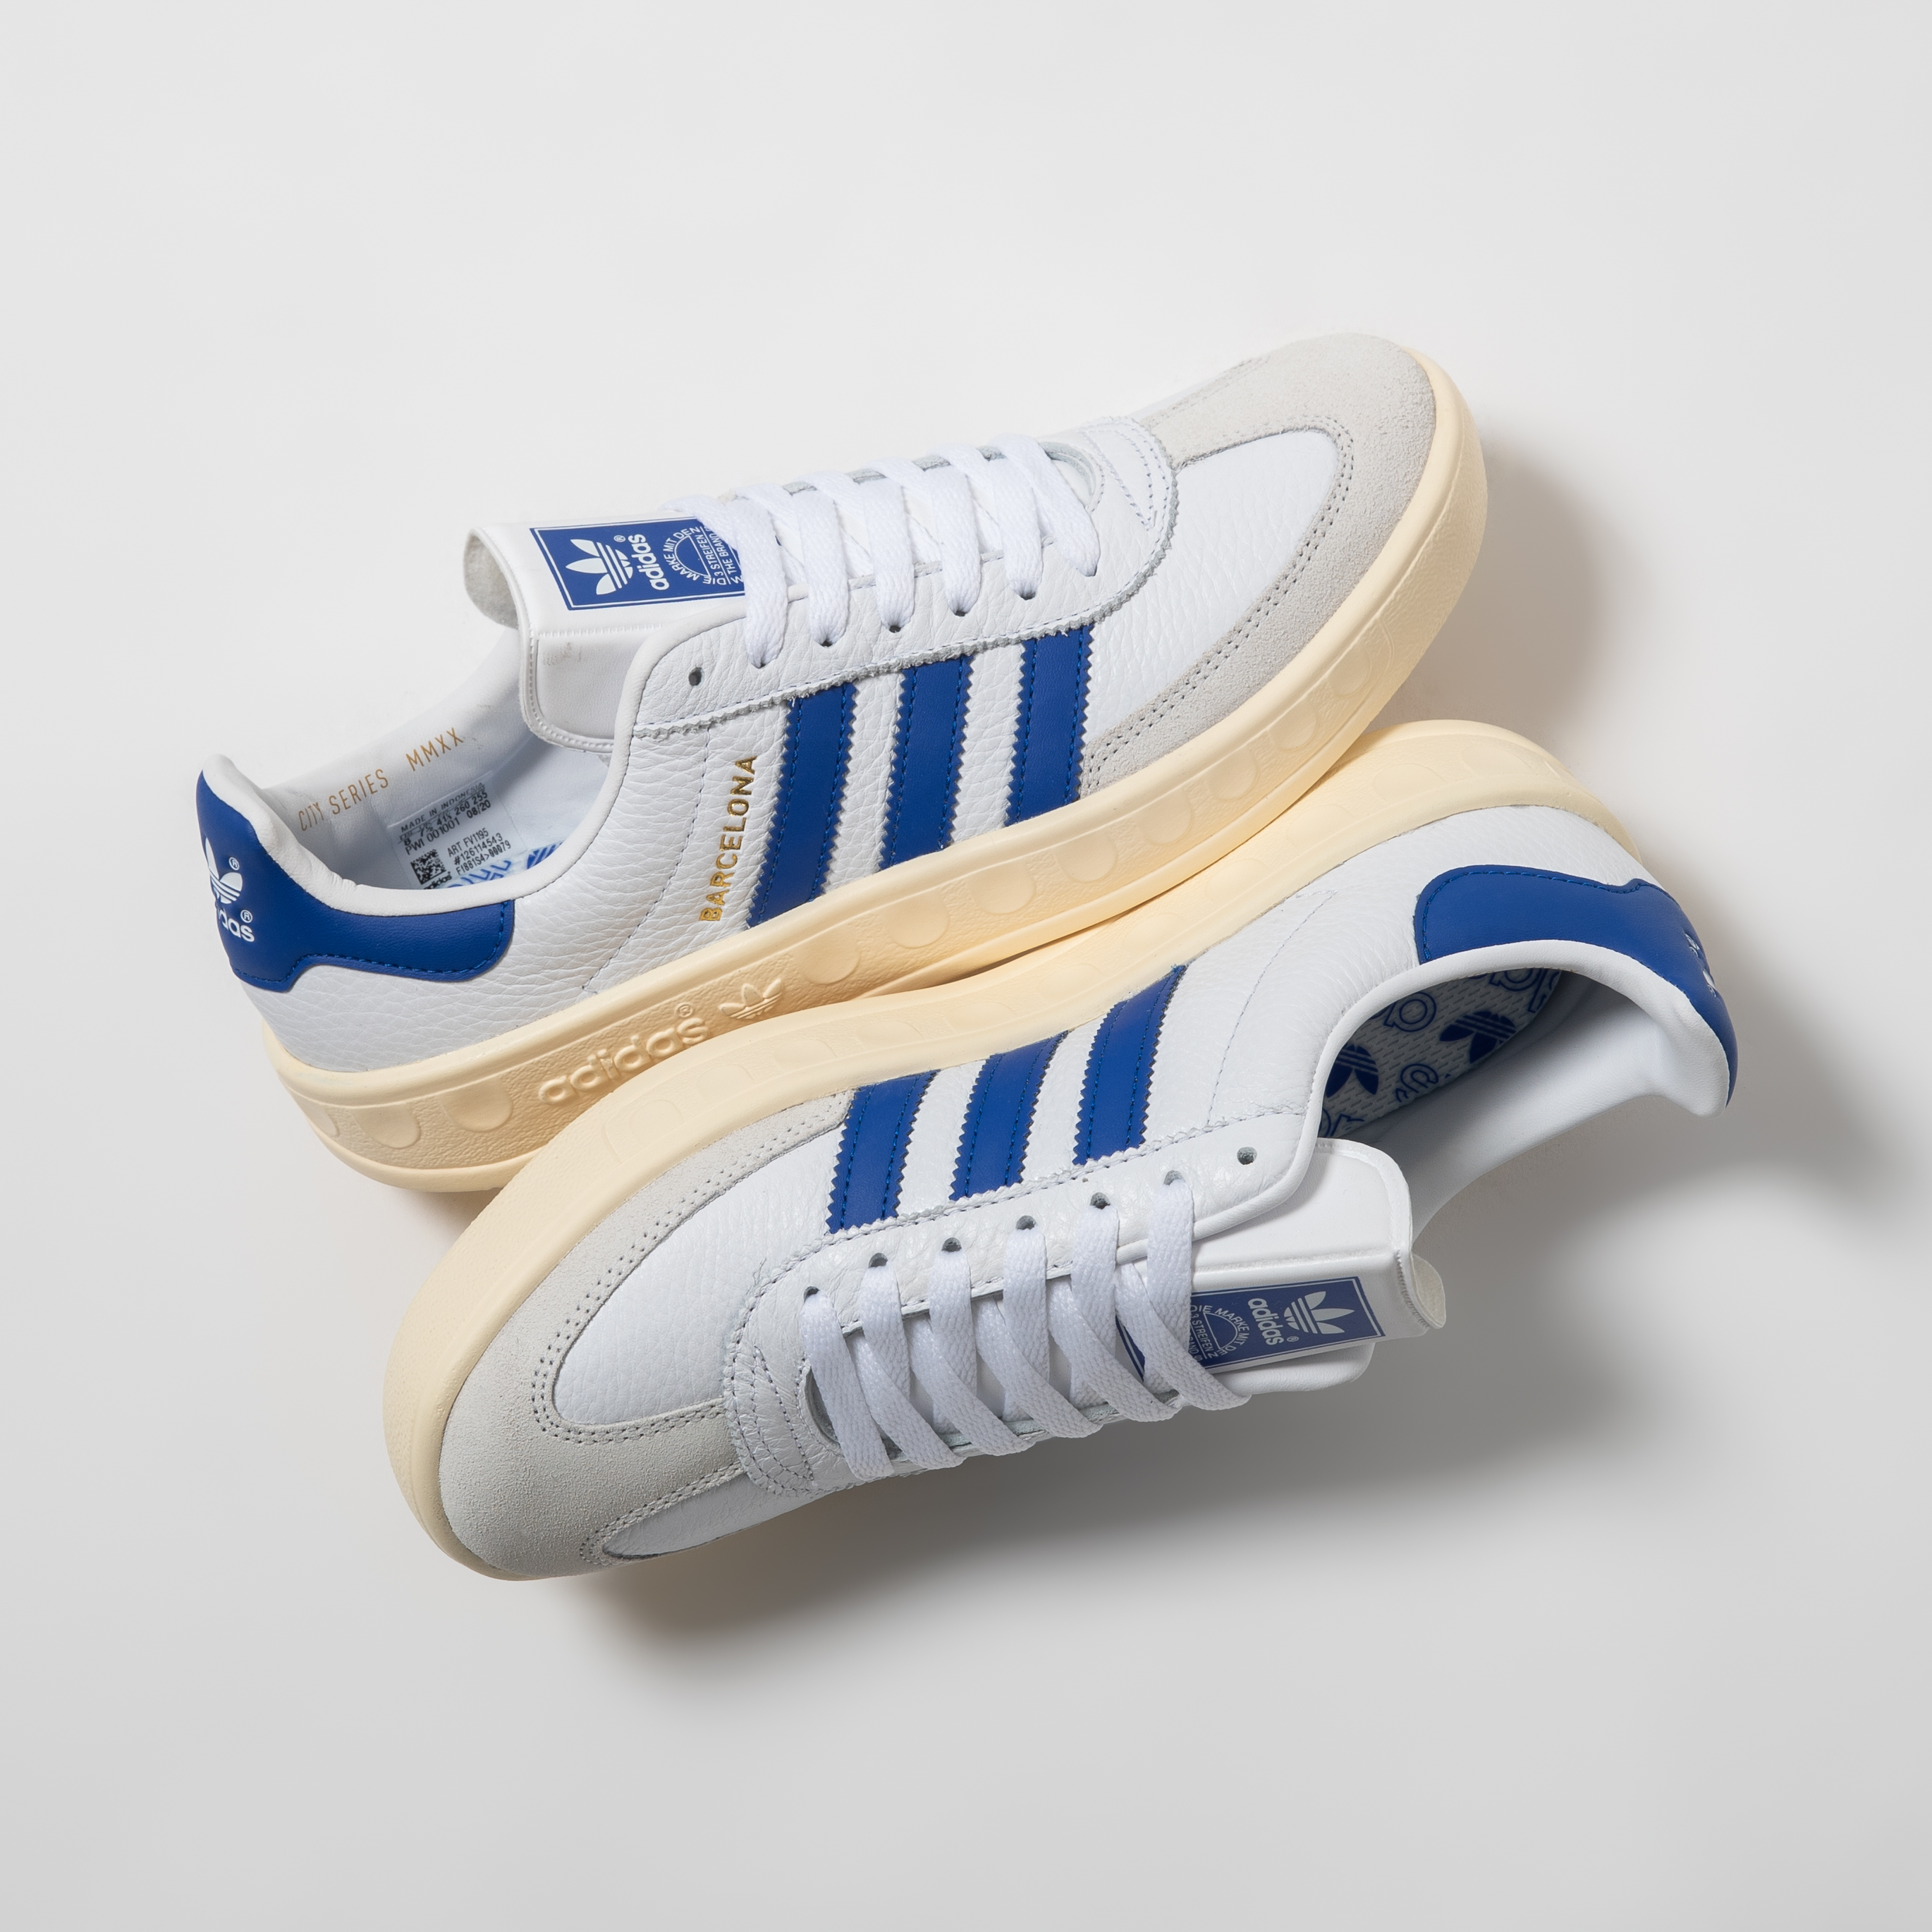 Titolo Twitter: "adidas Barcelona. Ride on the energy the vibrant city day in and day out. The distinctive midsole mirrors the '70s Trimm Trab trainer, but has a slimmer, more